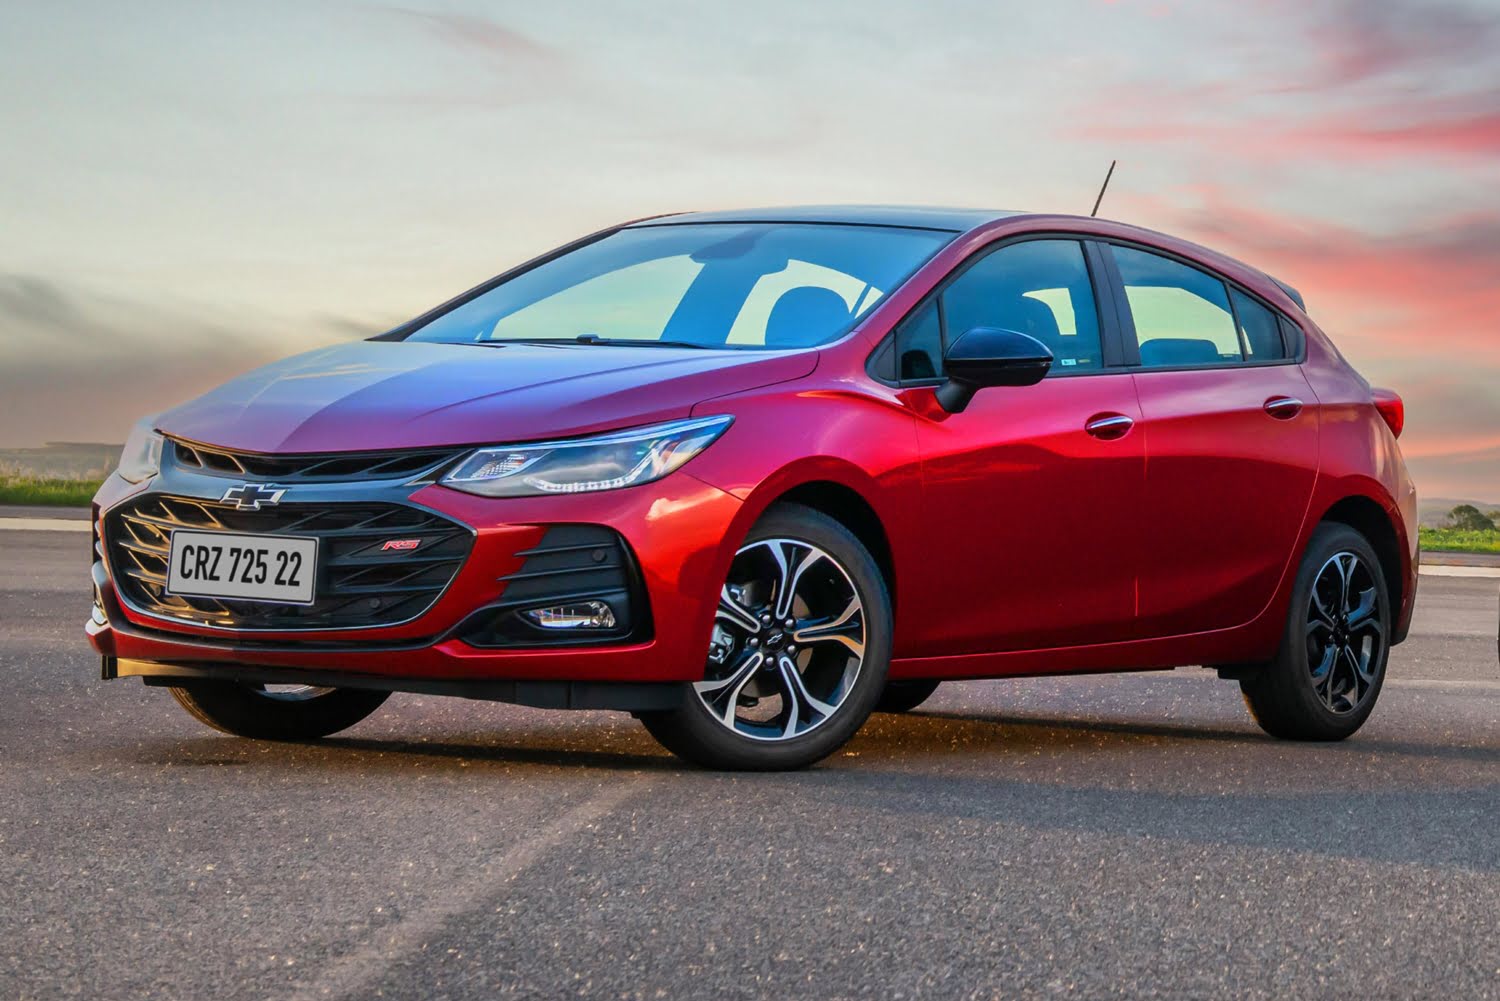 Refreshed 2021 Chevrolet Cruze Goes On Sale In Brazil